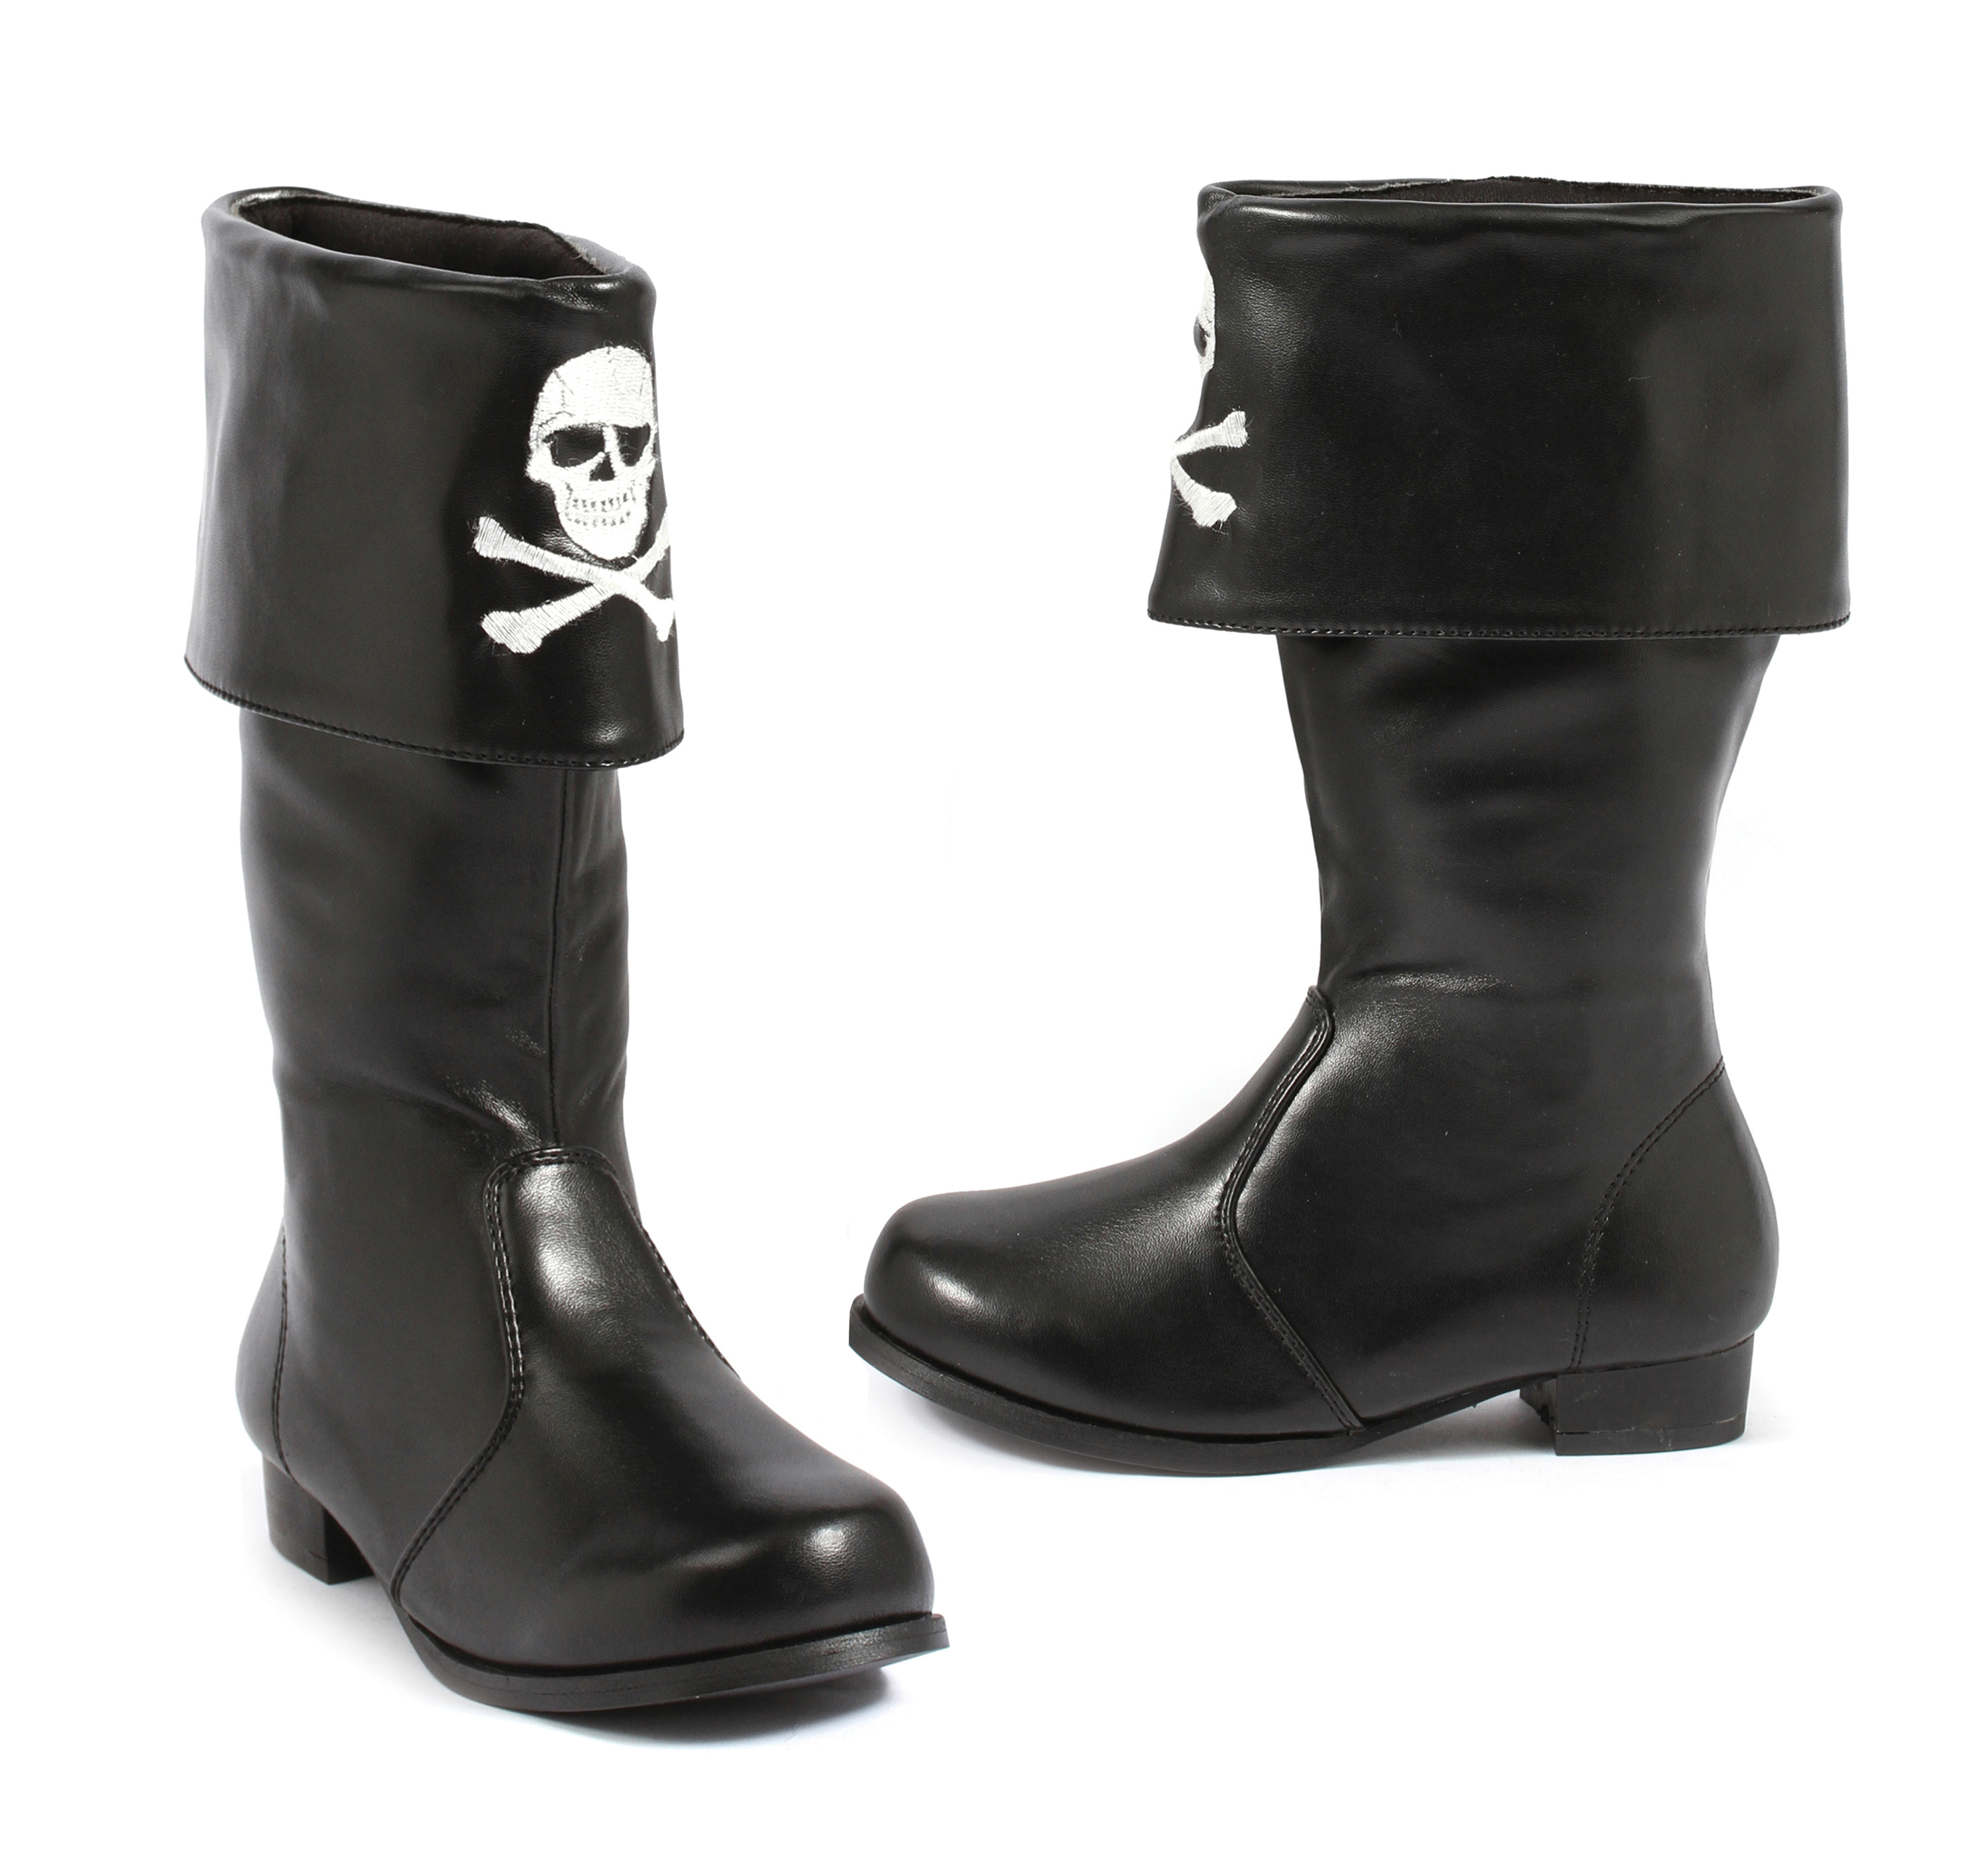 Ellie Shoes E-101-Patches 1 Heel Children Pirate Boot with Embroidered Skull Black / XS - image 2 of 2